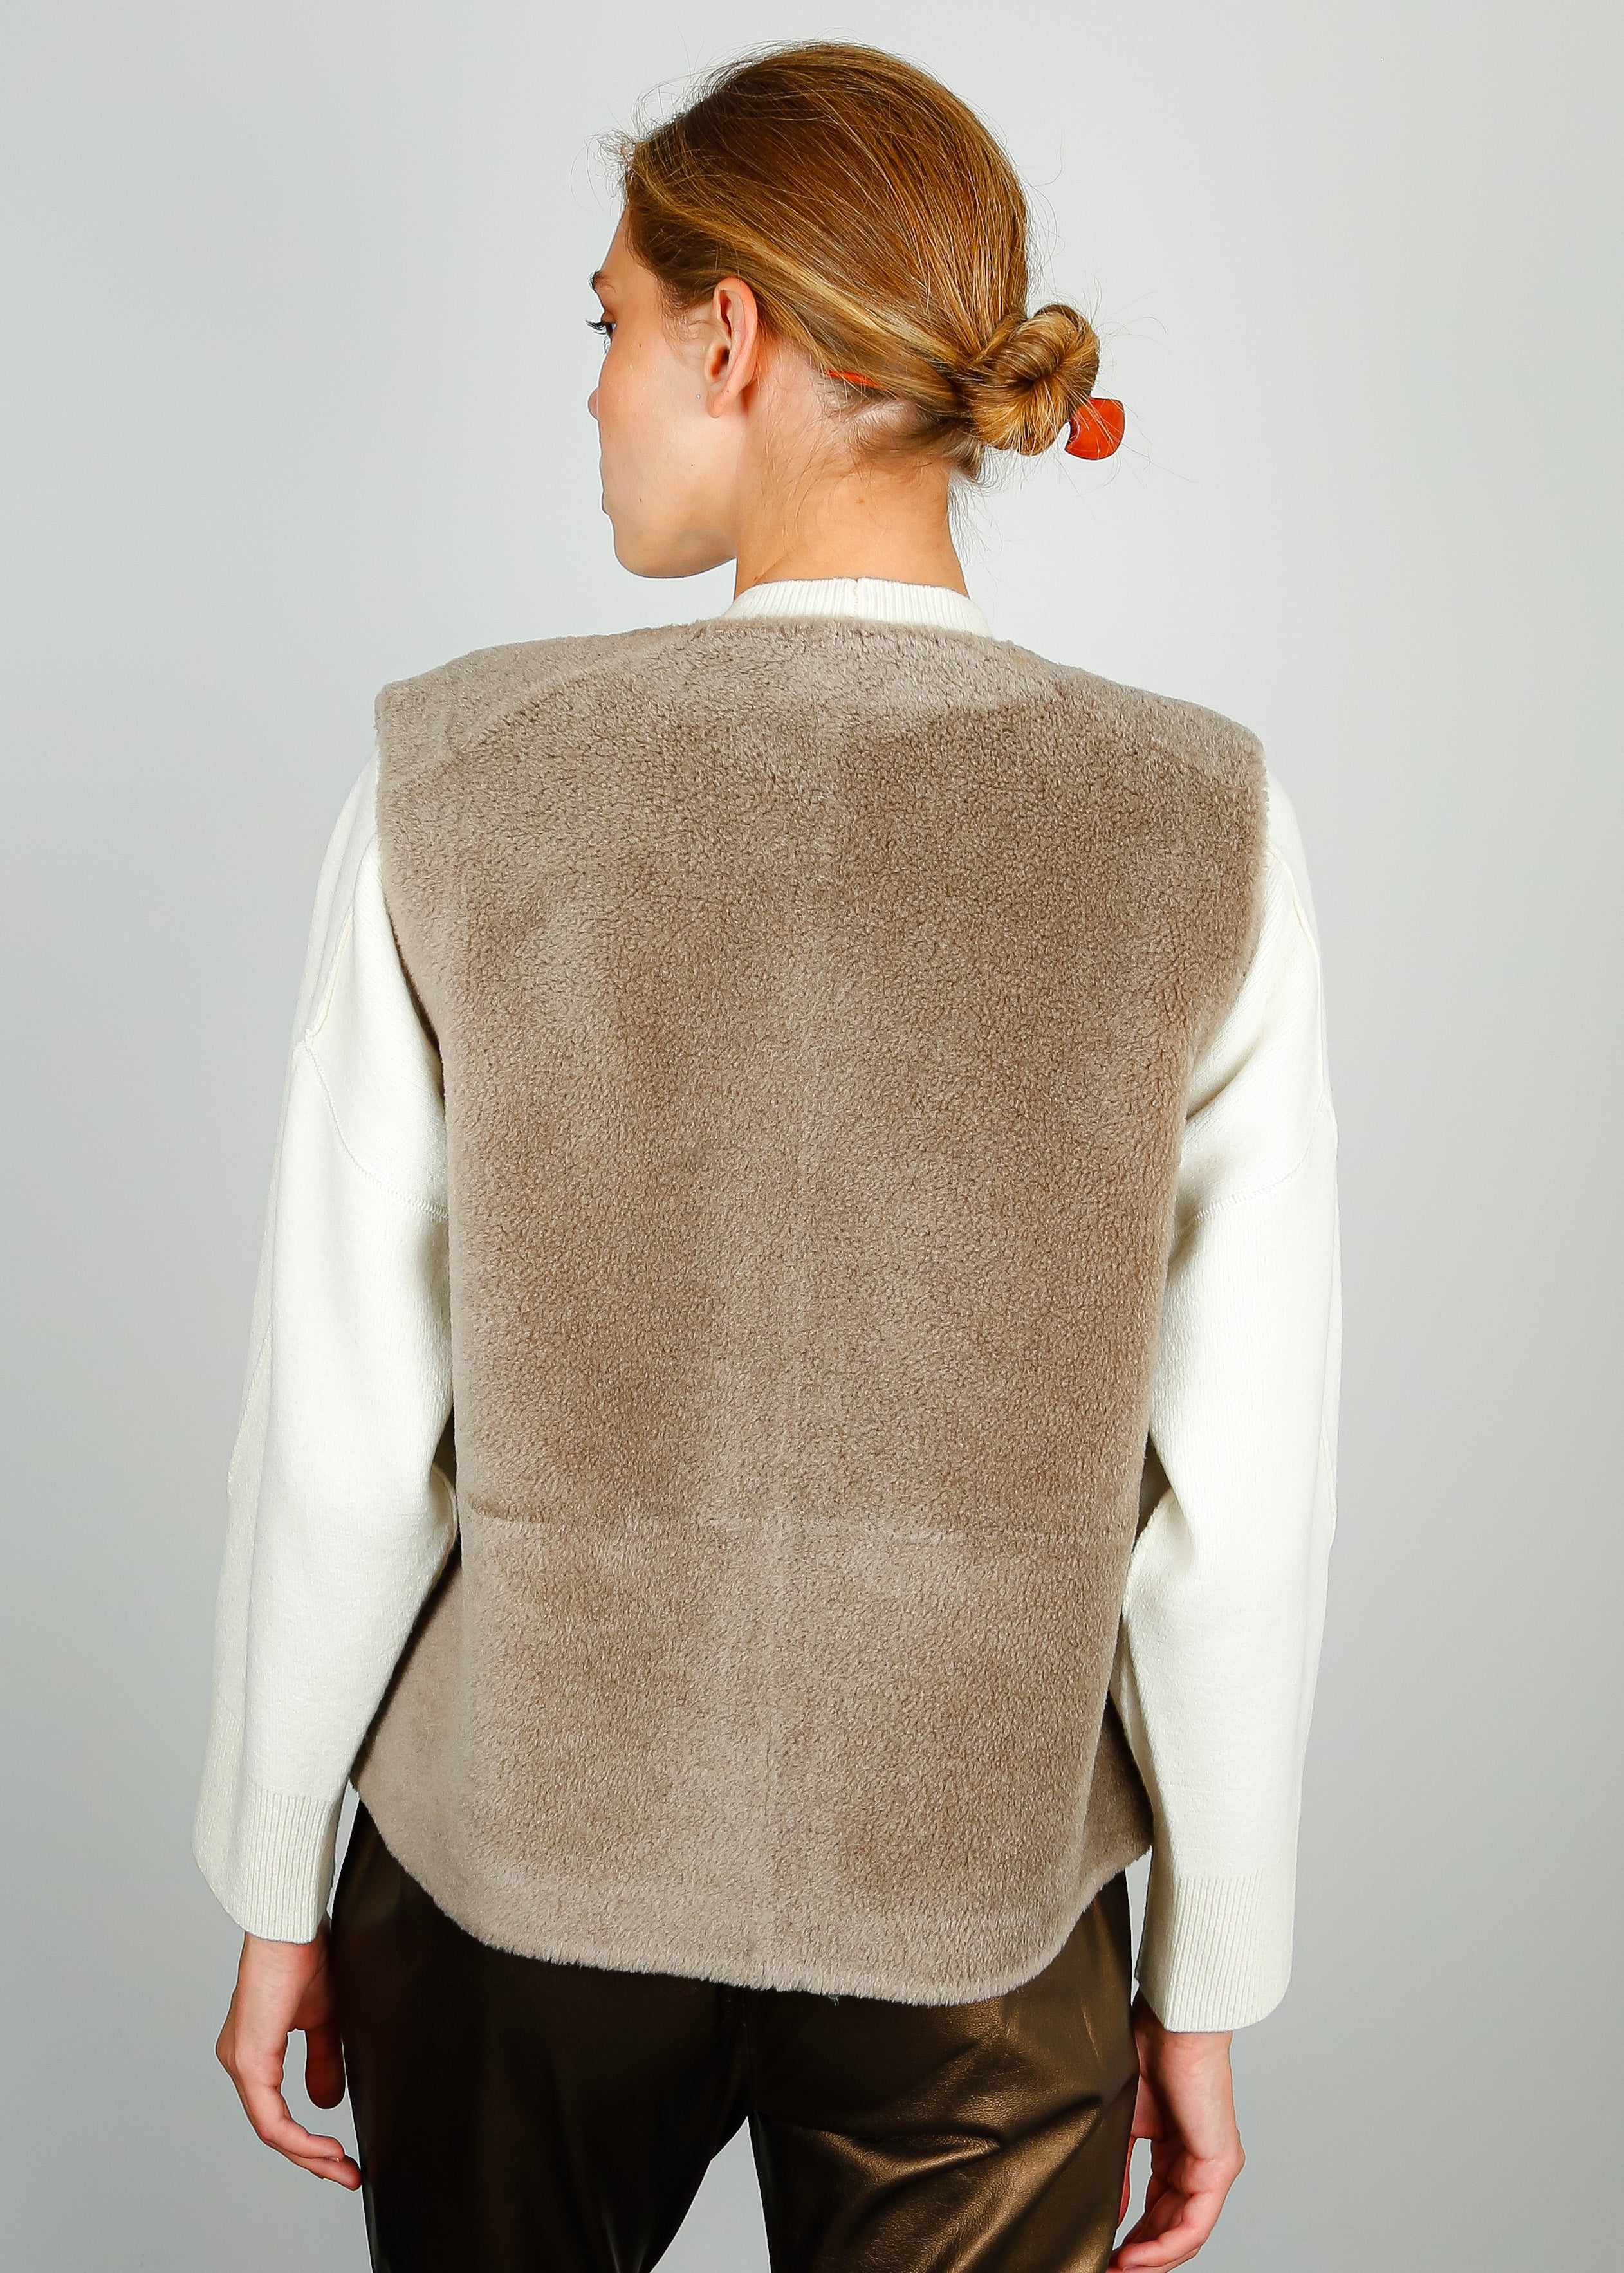 OW Signature Lily Fur Gilet in Taupe